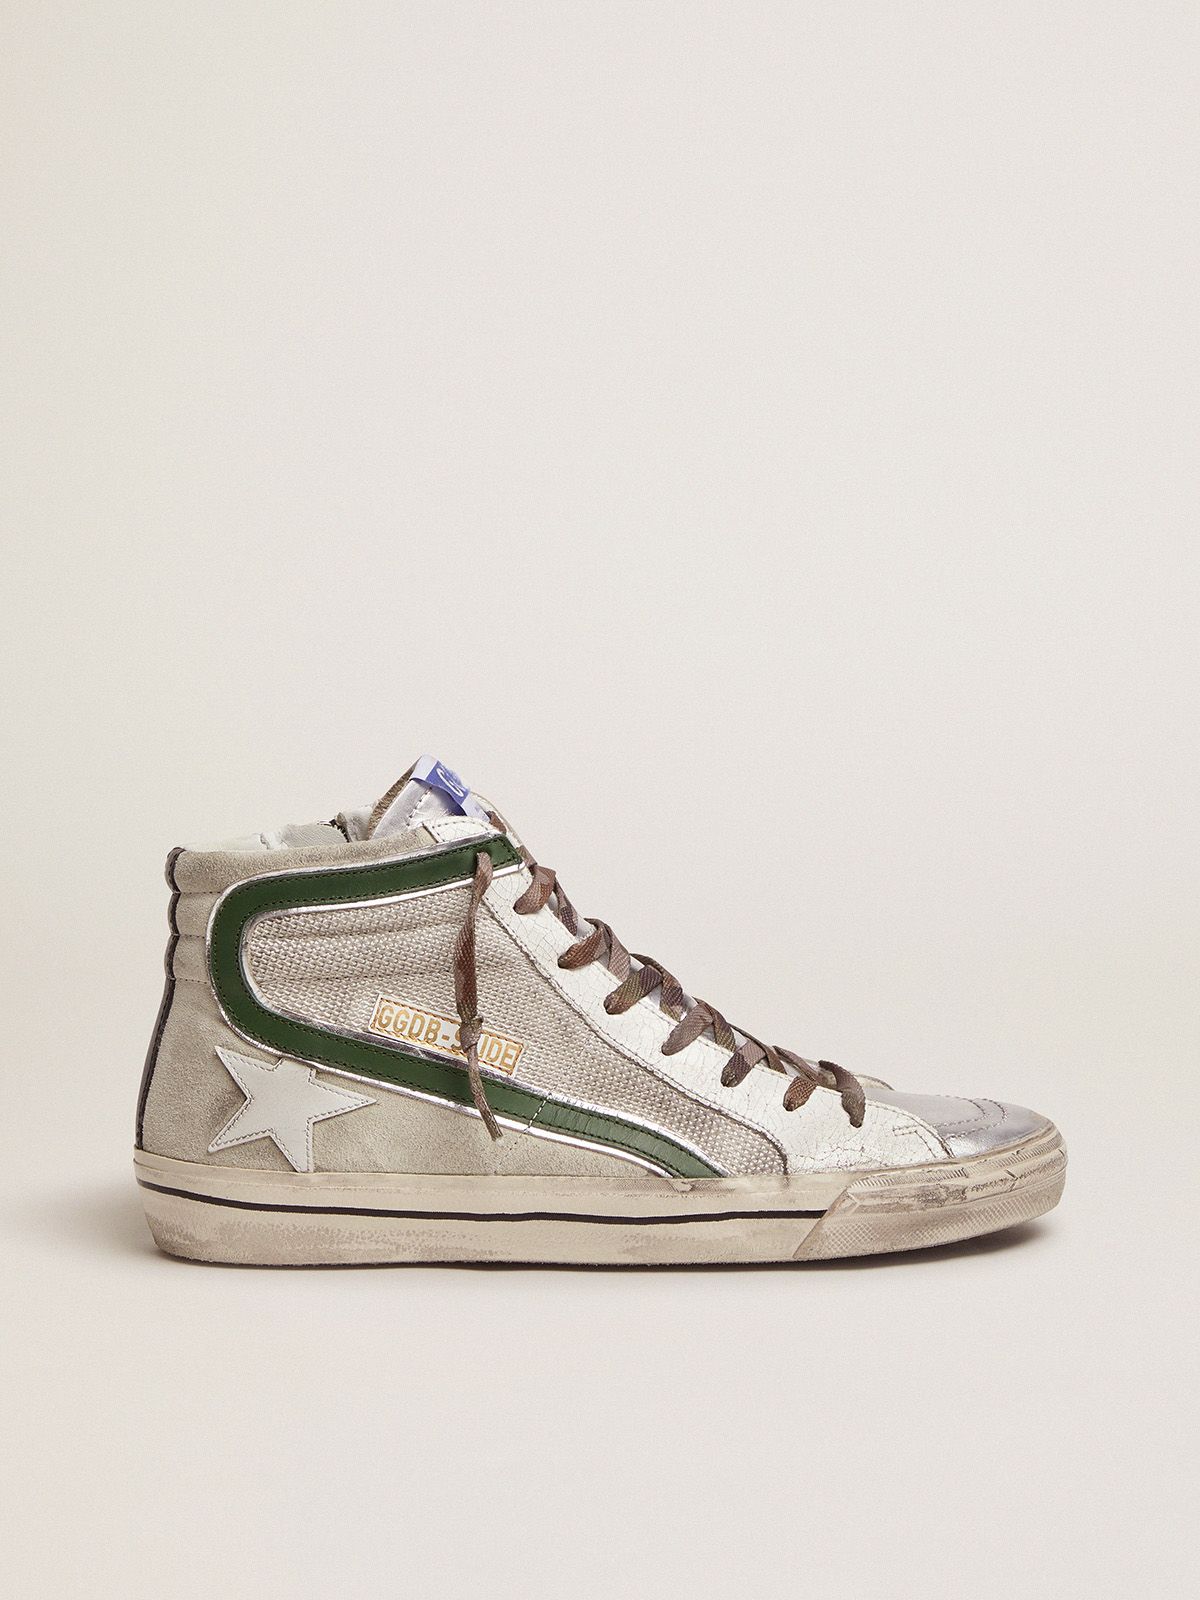 Slide LTD sneakers in leather and mesh with green flash